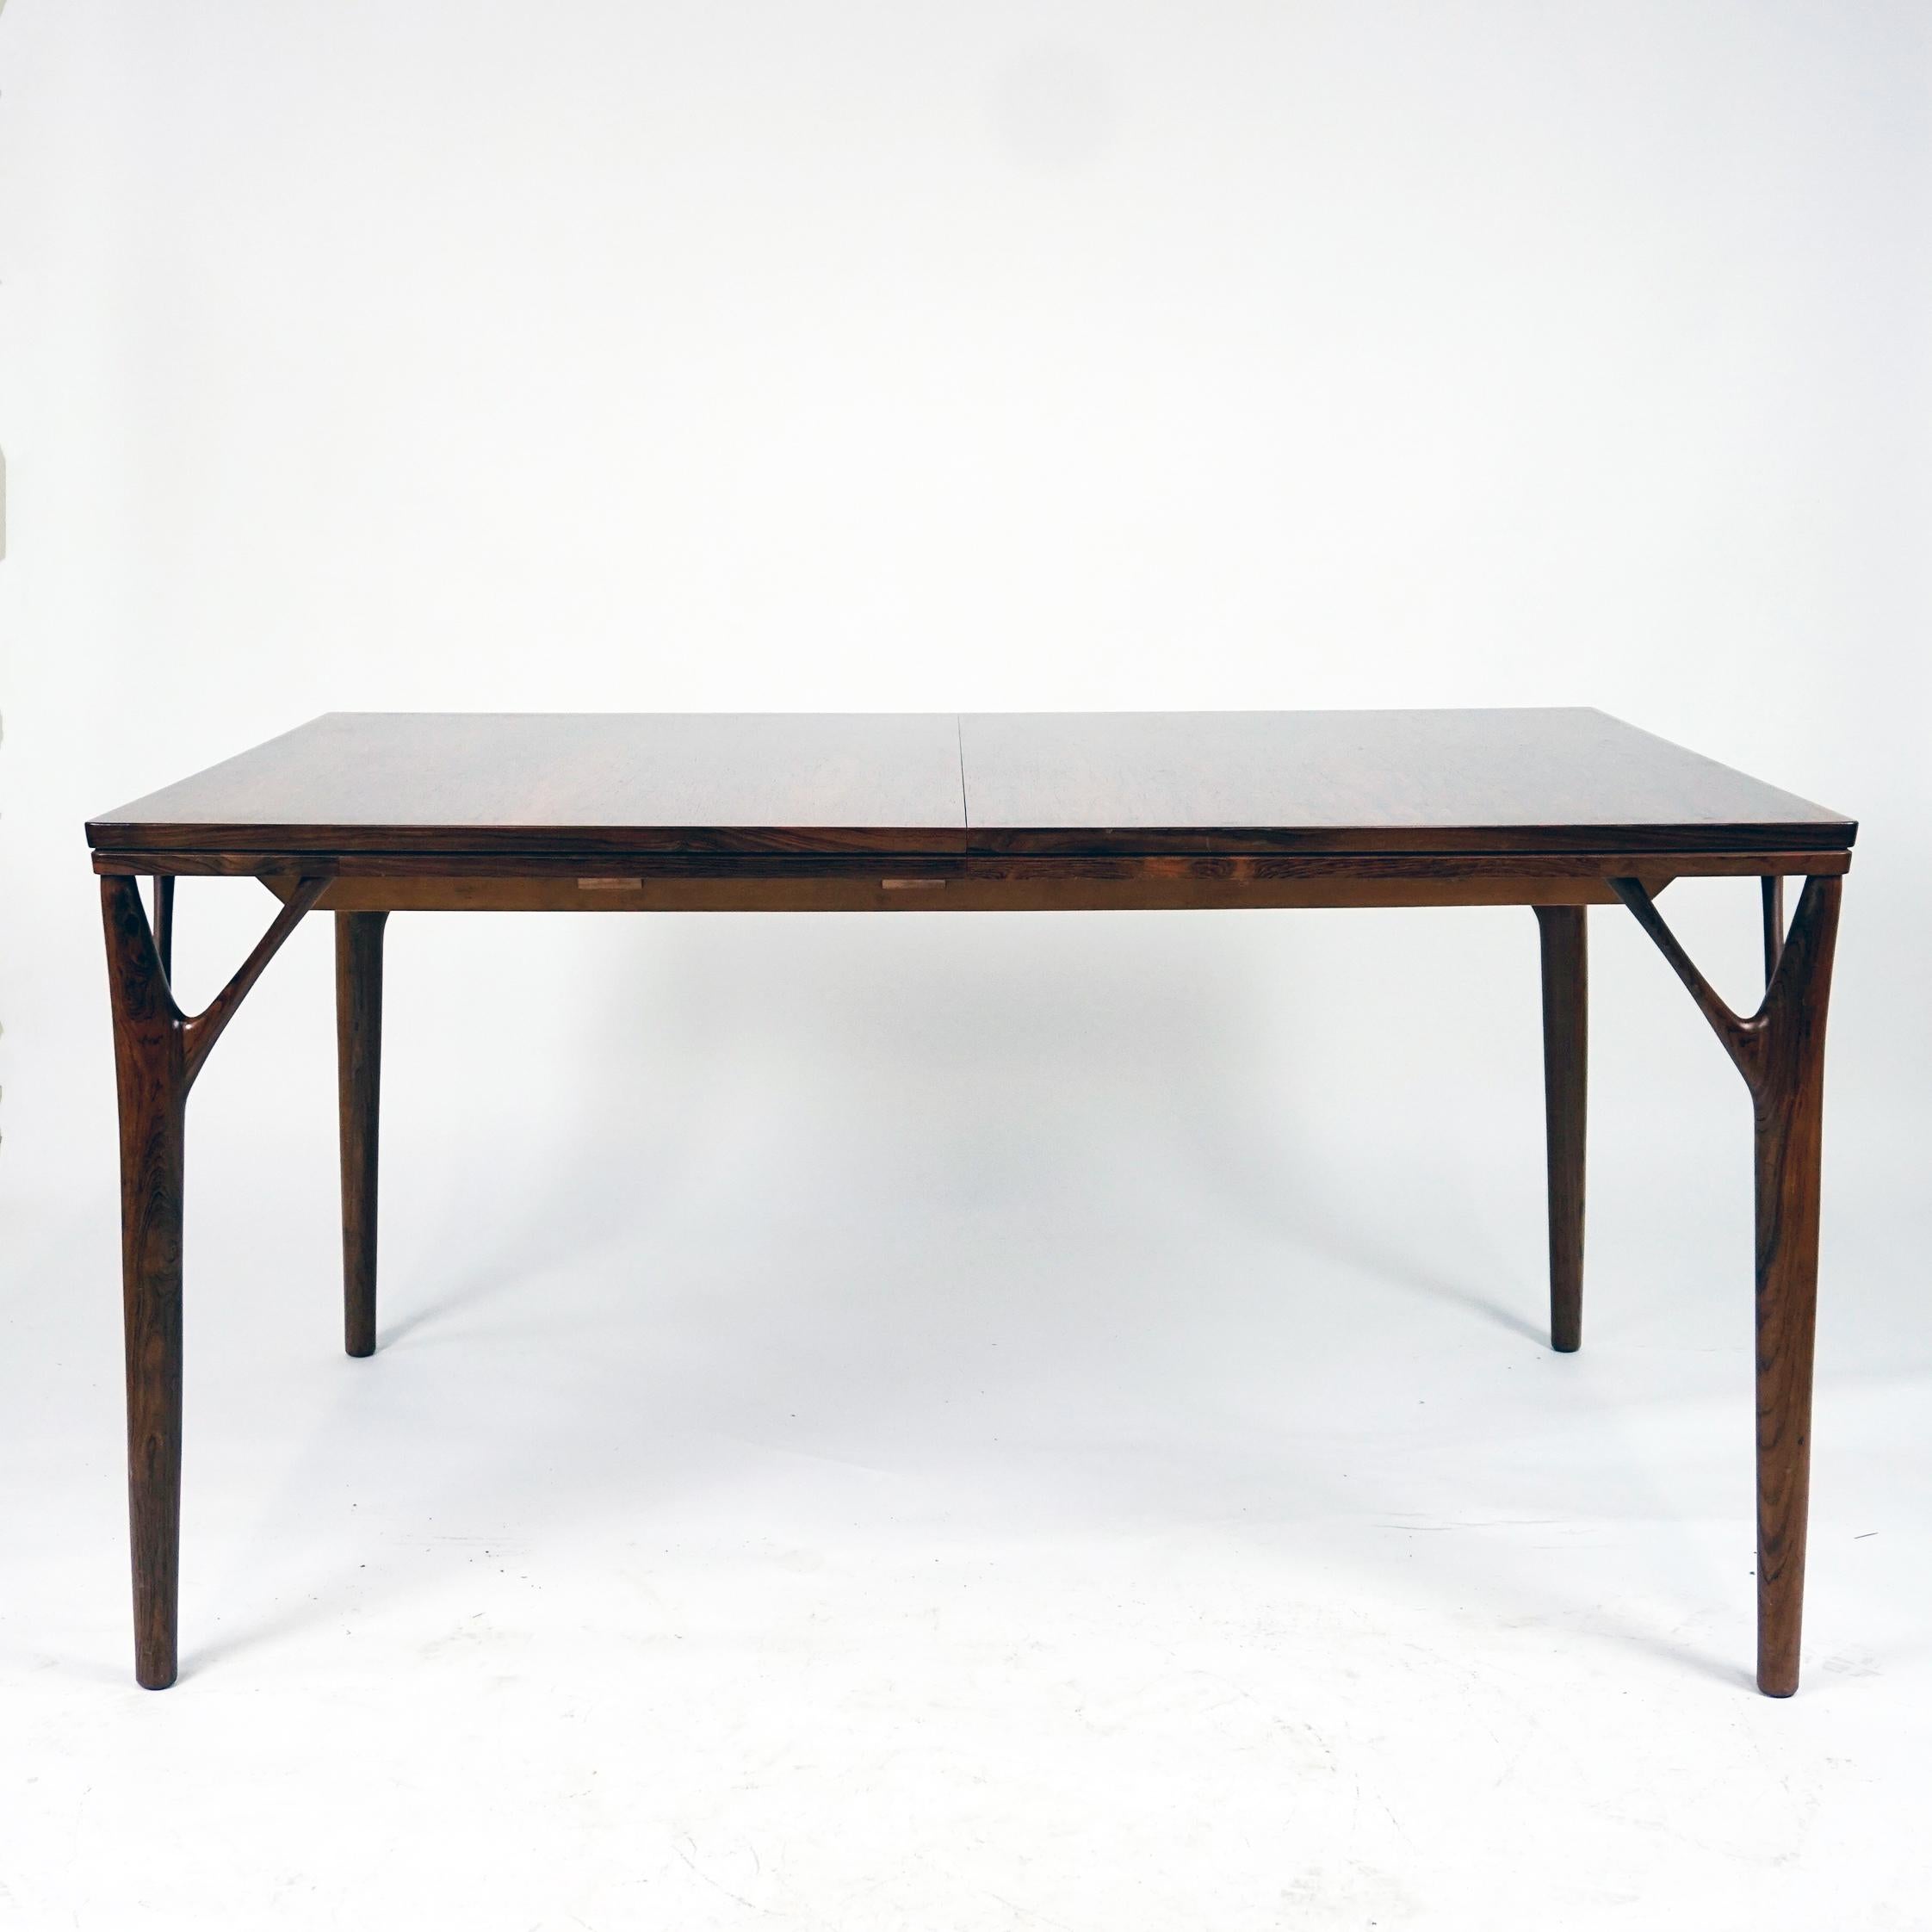 This Scandinavian Modern Extendable Danish dining table was designed by Helge Vestergaard Jensen in the late 1950s and was manufactured by Peder Pedersen in the 1960s in Denmark.
We can call this a Highlight from the Scandinavian Modern design